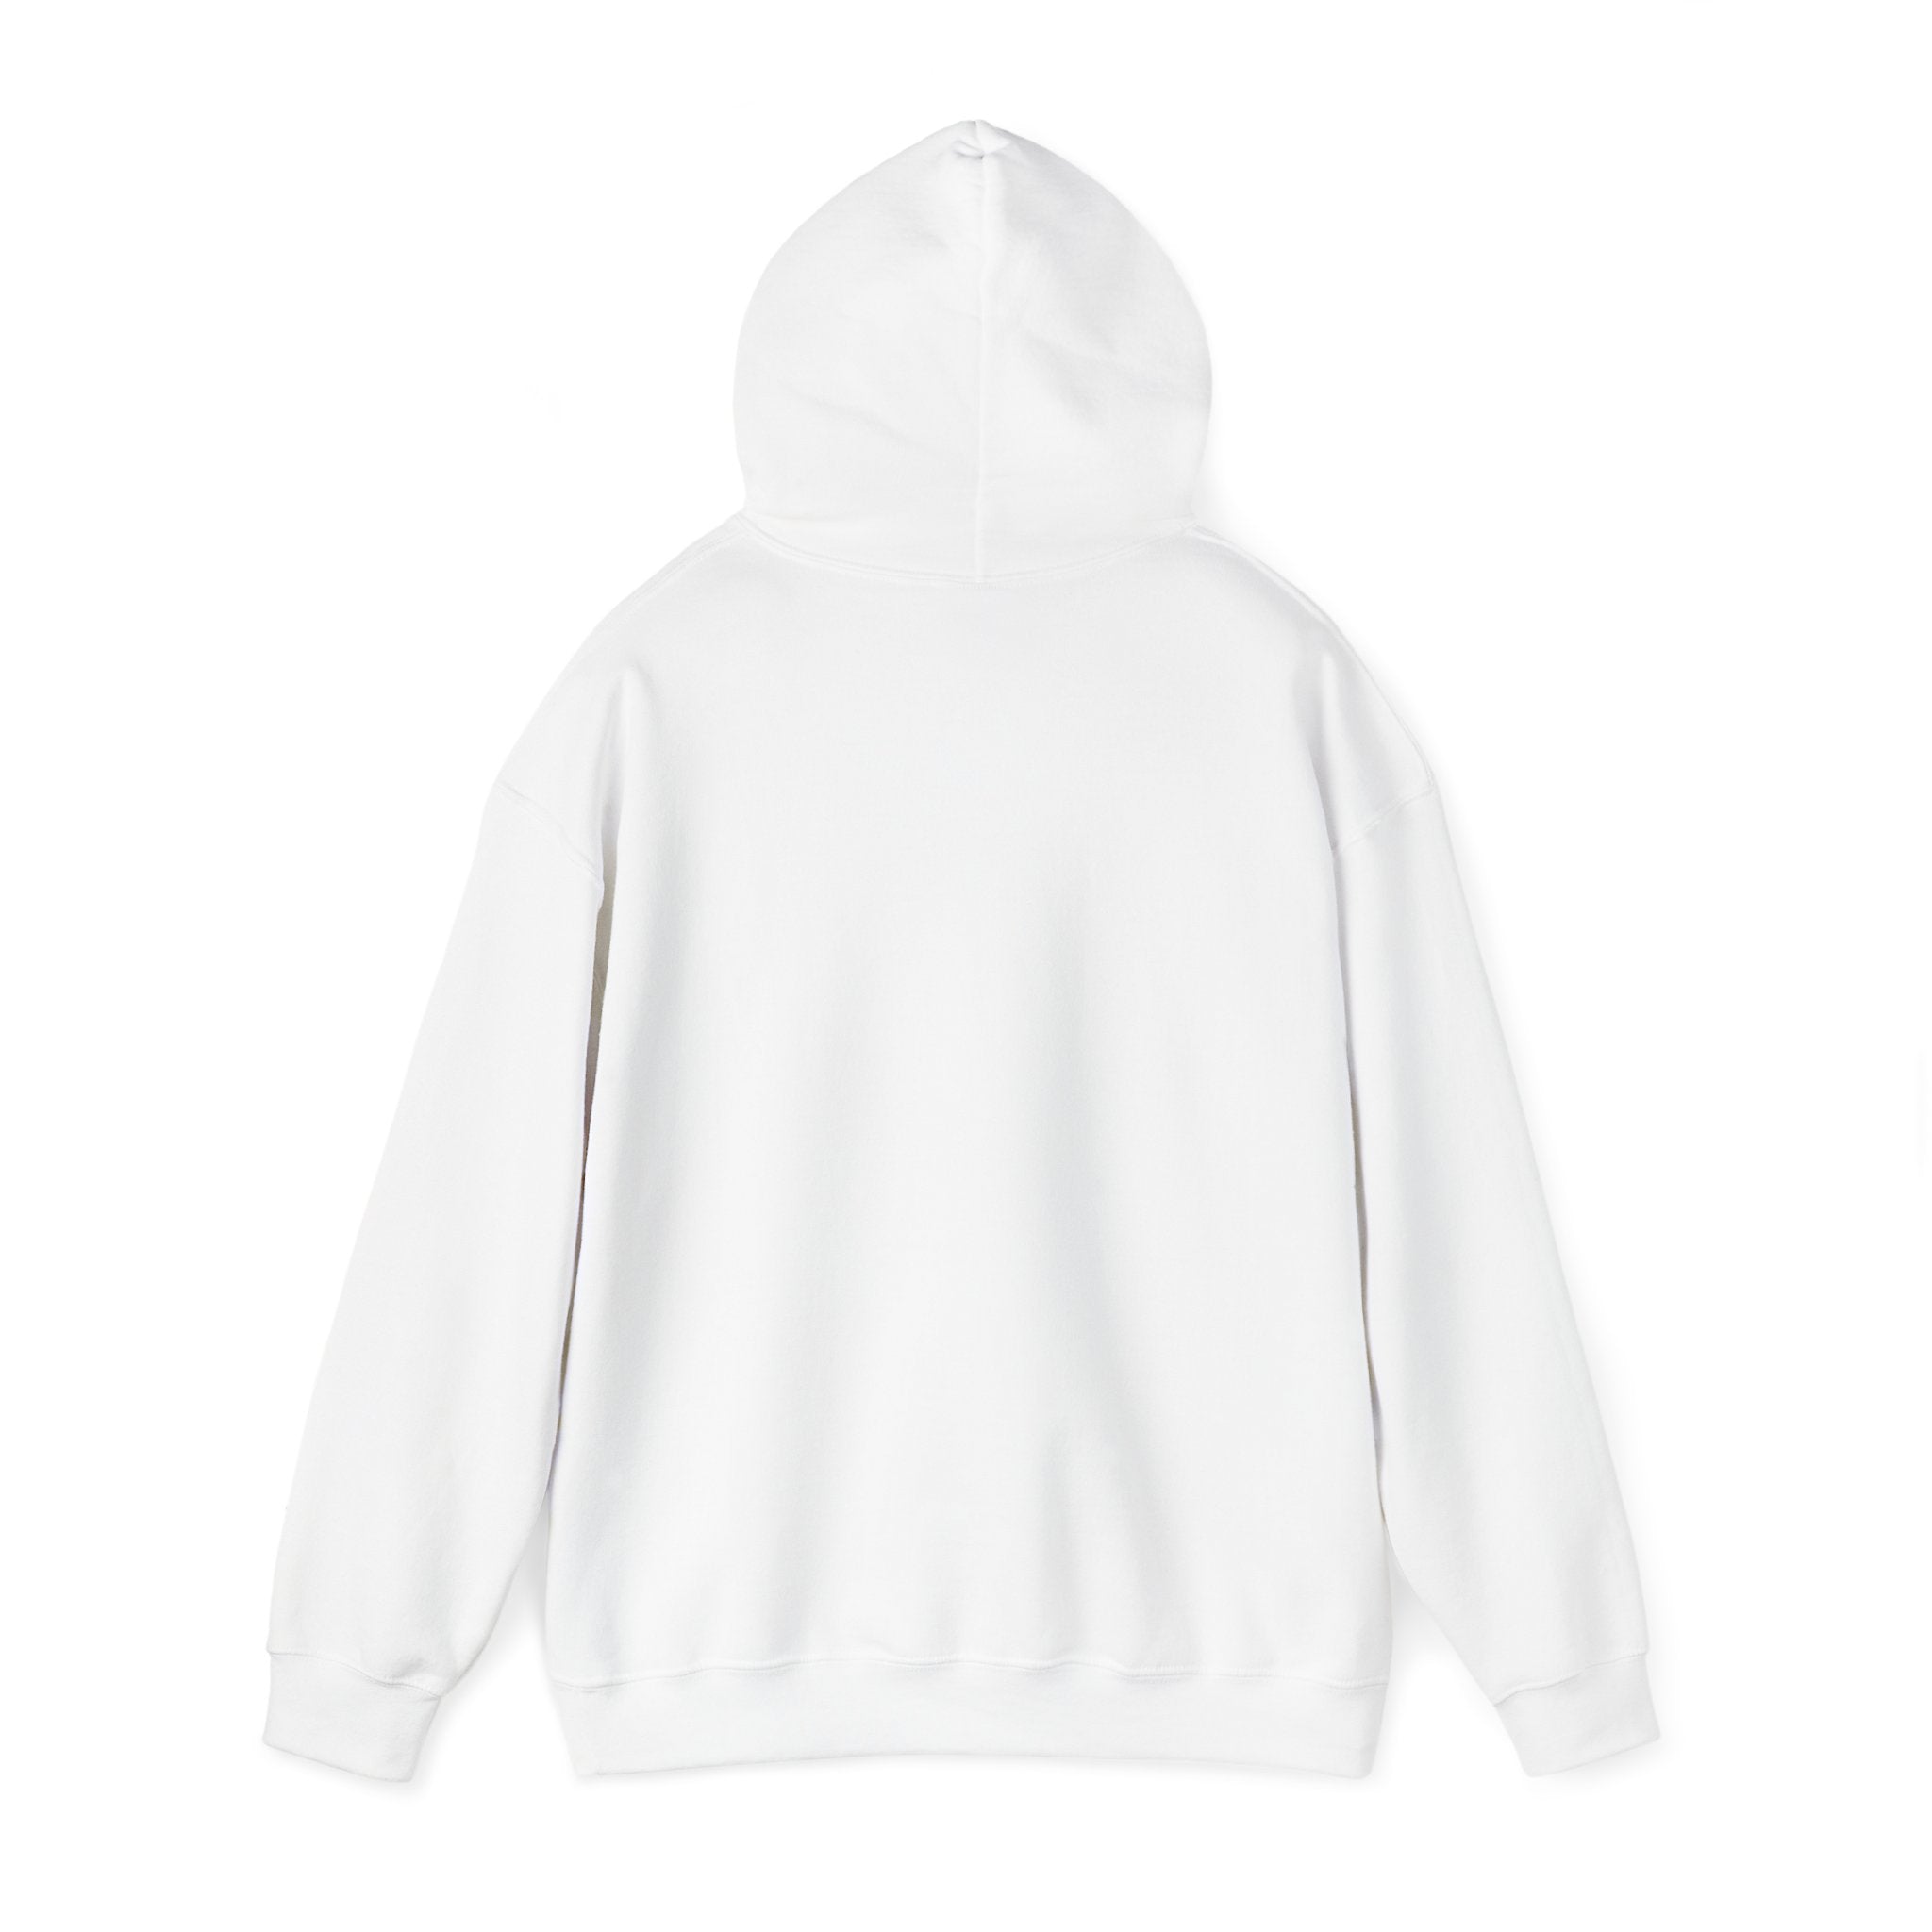 A plain white Wings of Victory - Hooded Sweatshirt shown from the back, featuring long sleeves and a relaxed fit, epitomizes casual fashion.